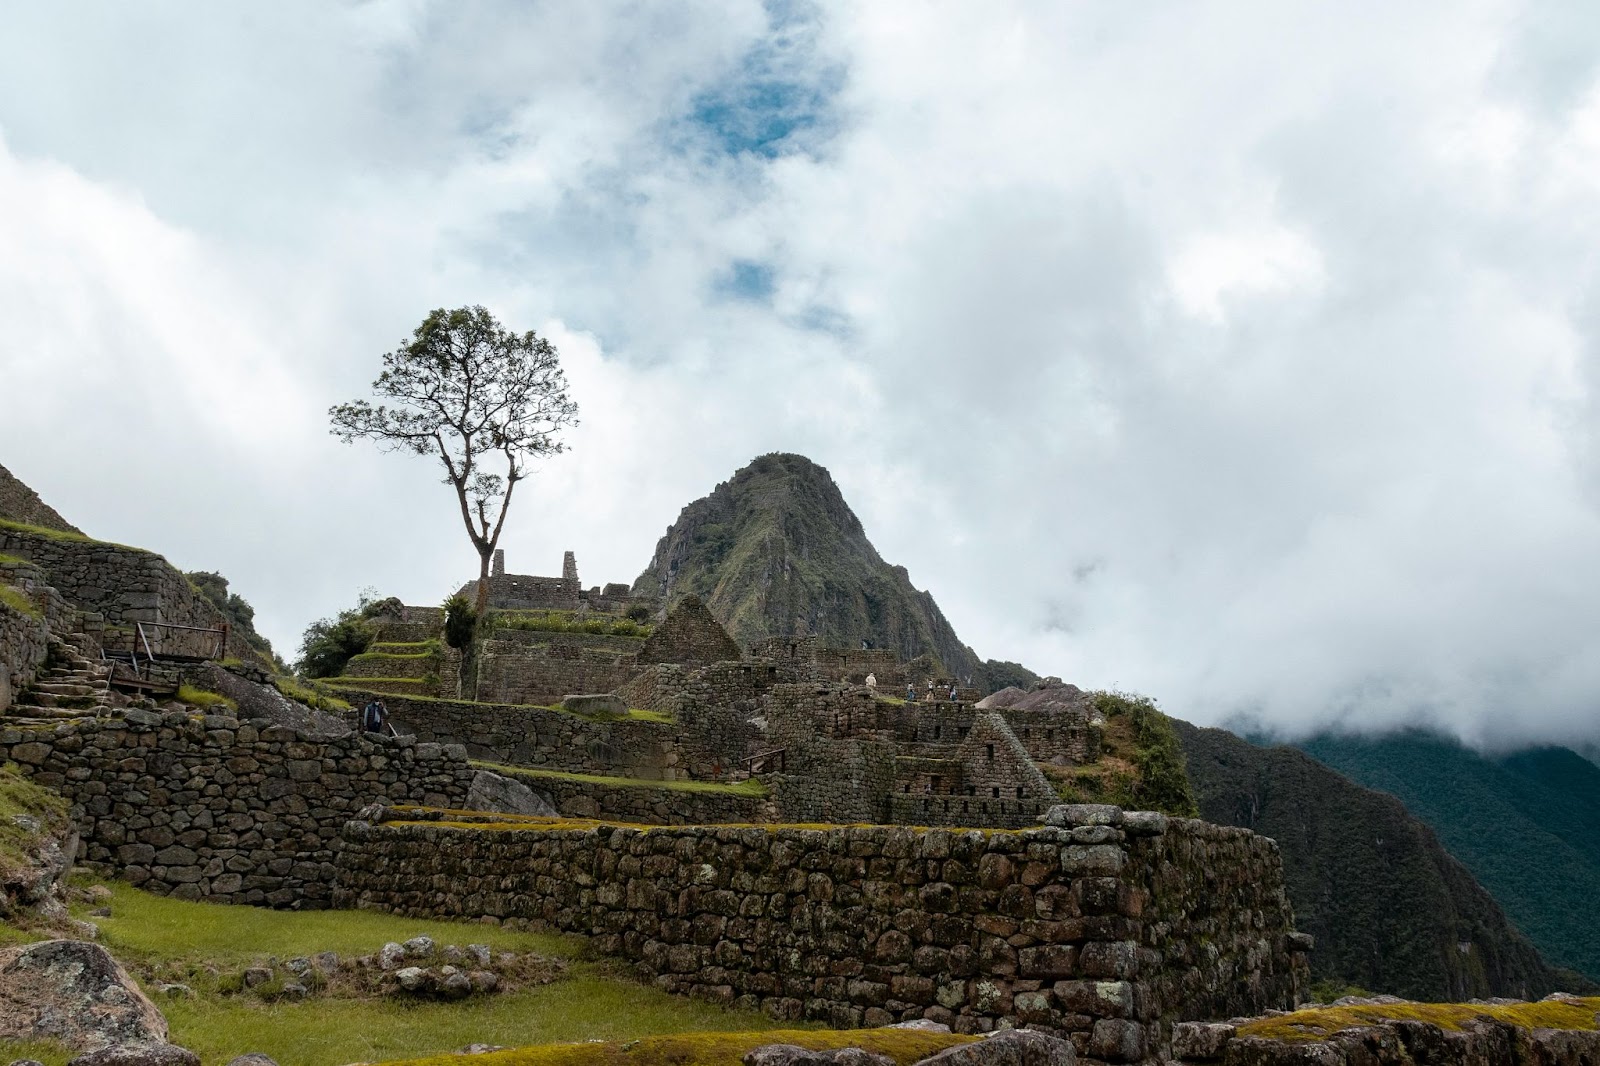 The spiritual significance of Machu Picchu is a great reason to visit. 
pictured: Machu Picchu 